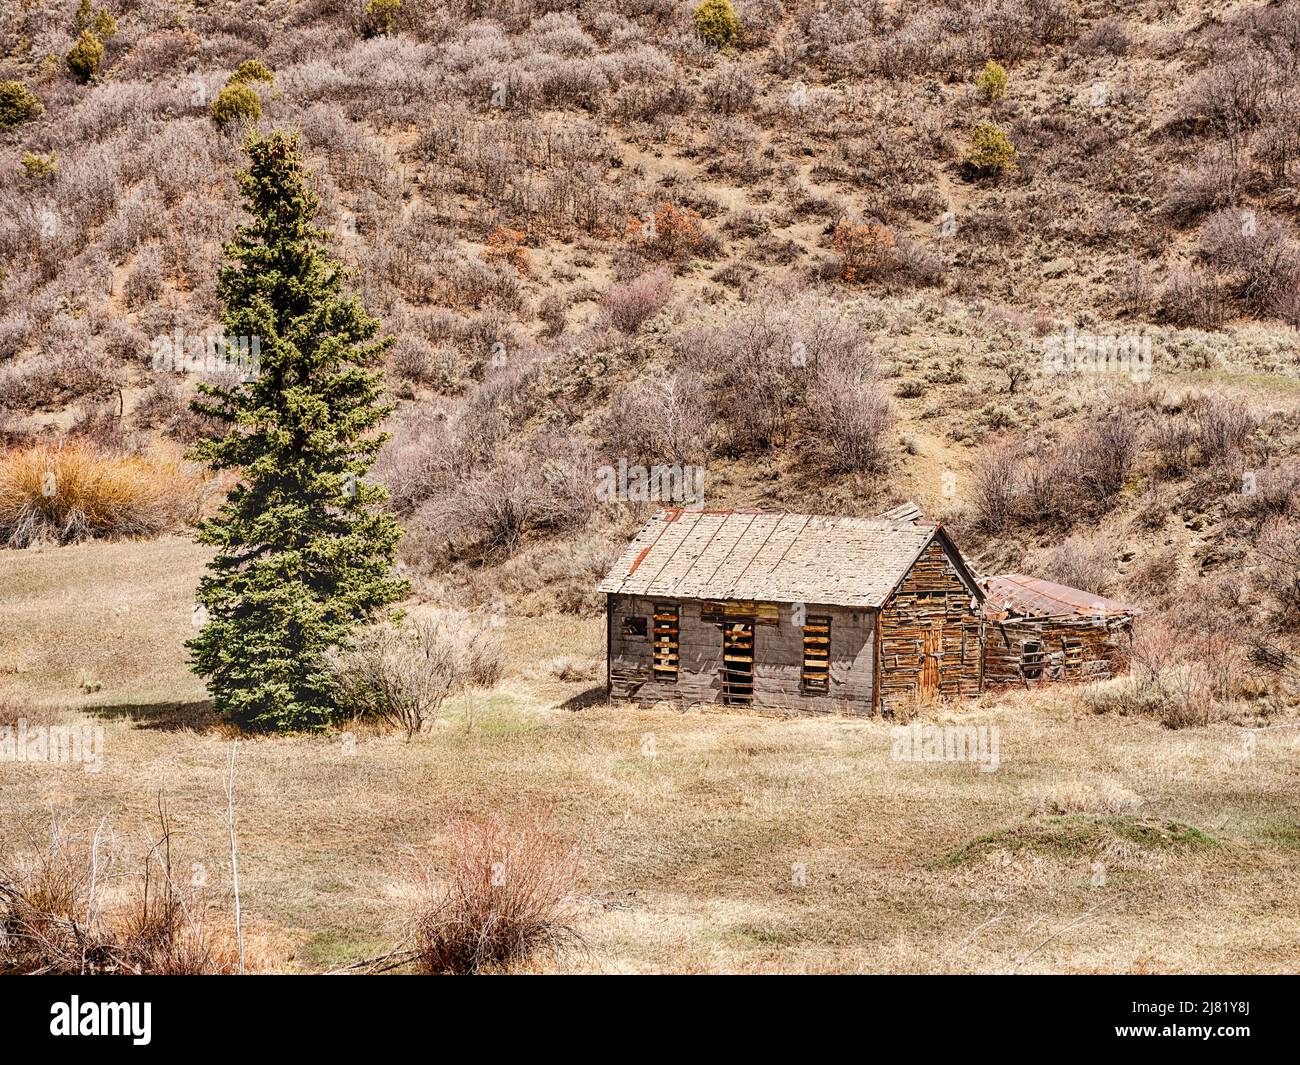 A small farm barn or shed sits at the edge of a rural field near Snowmass in Colorado. Stock Photo